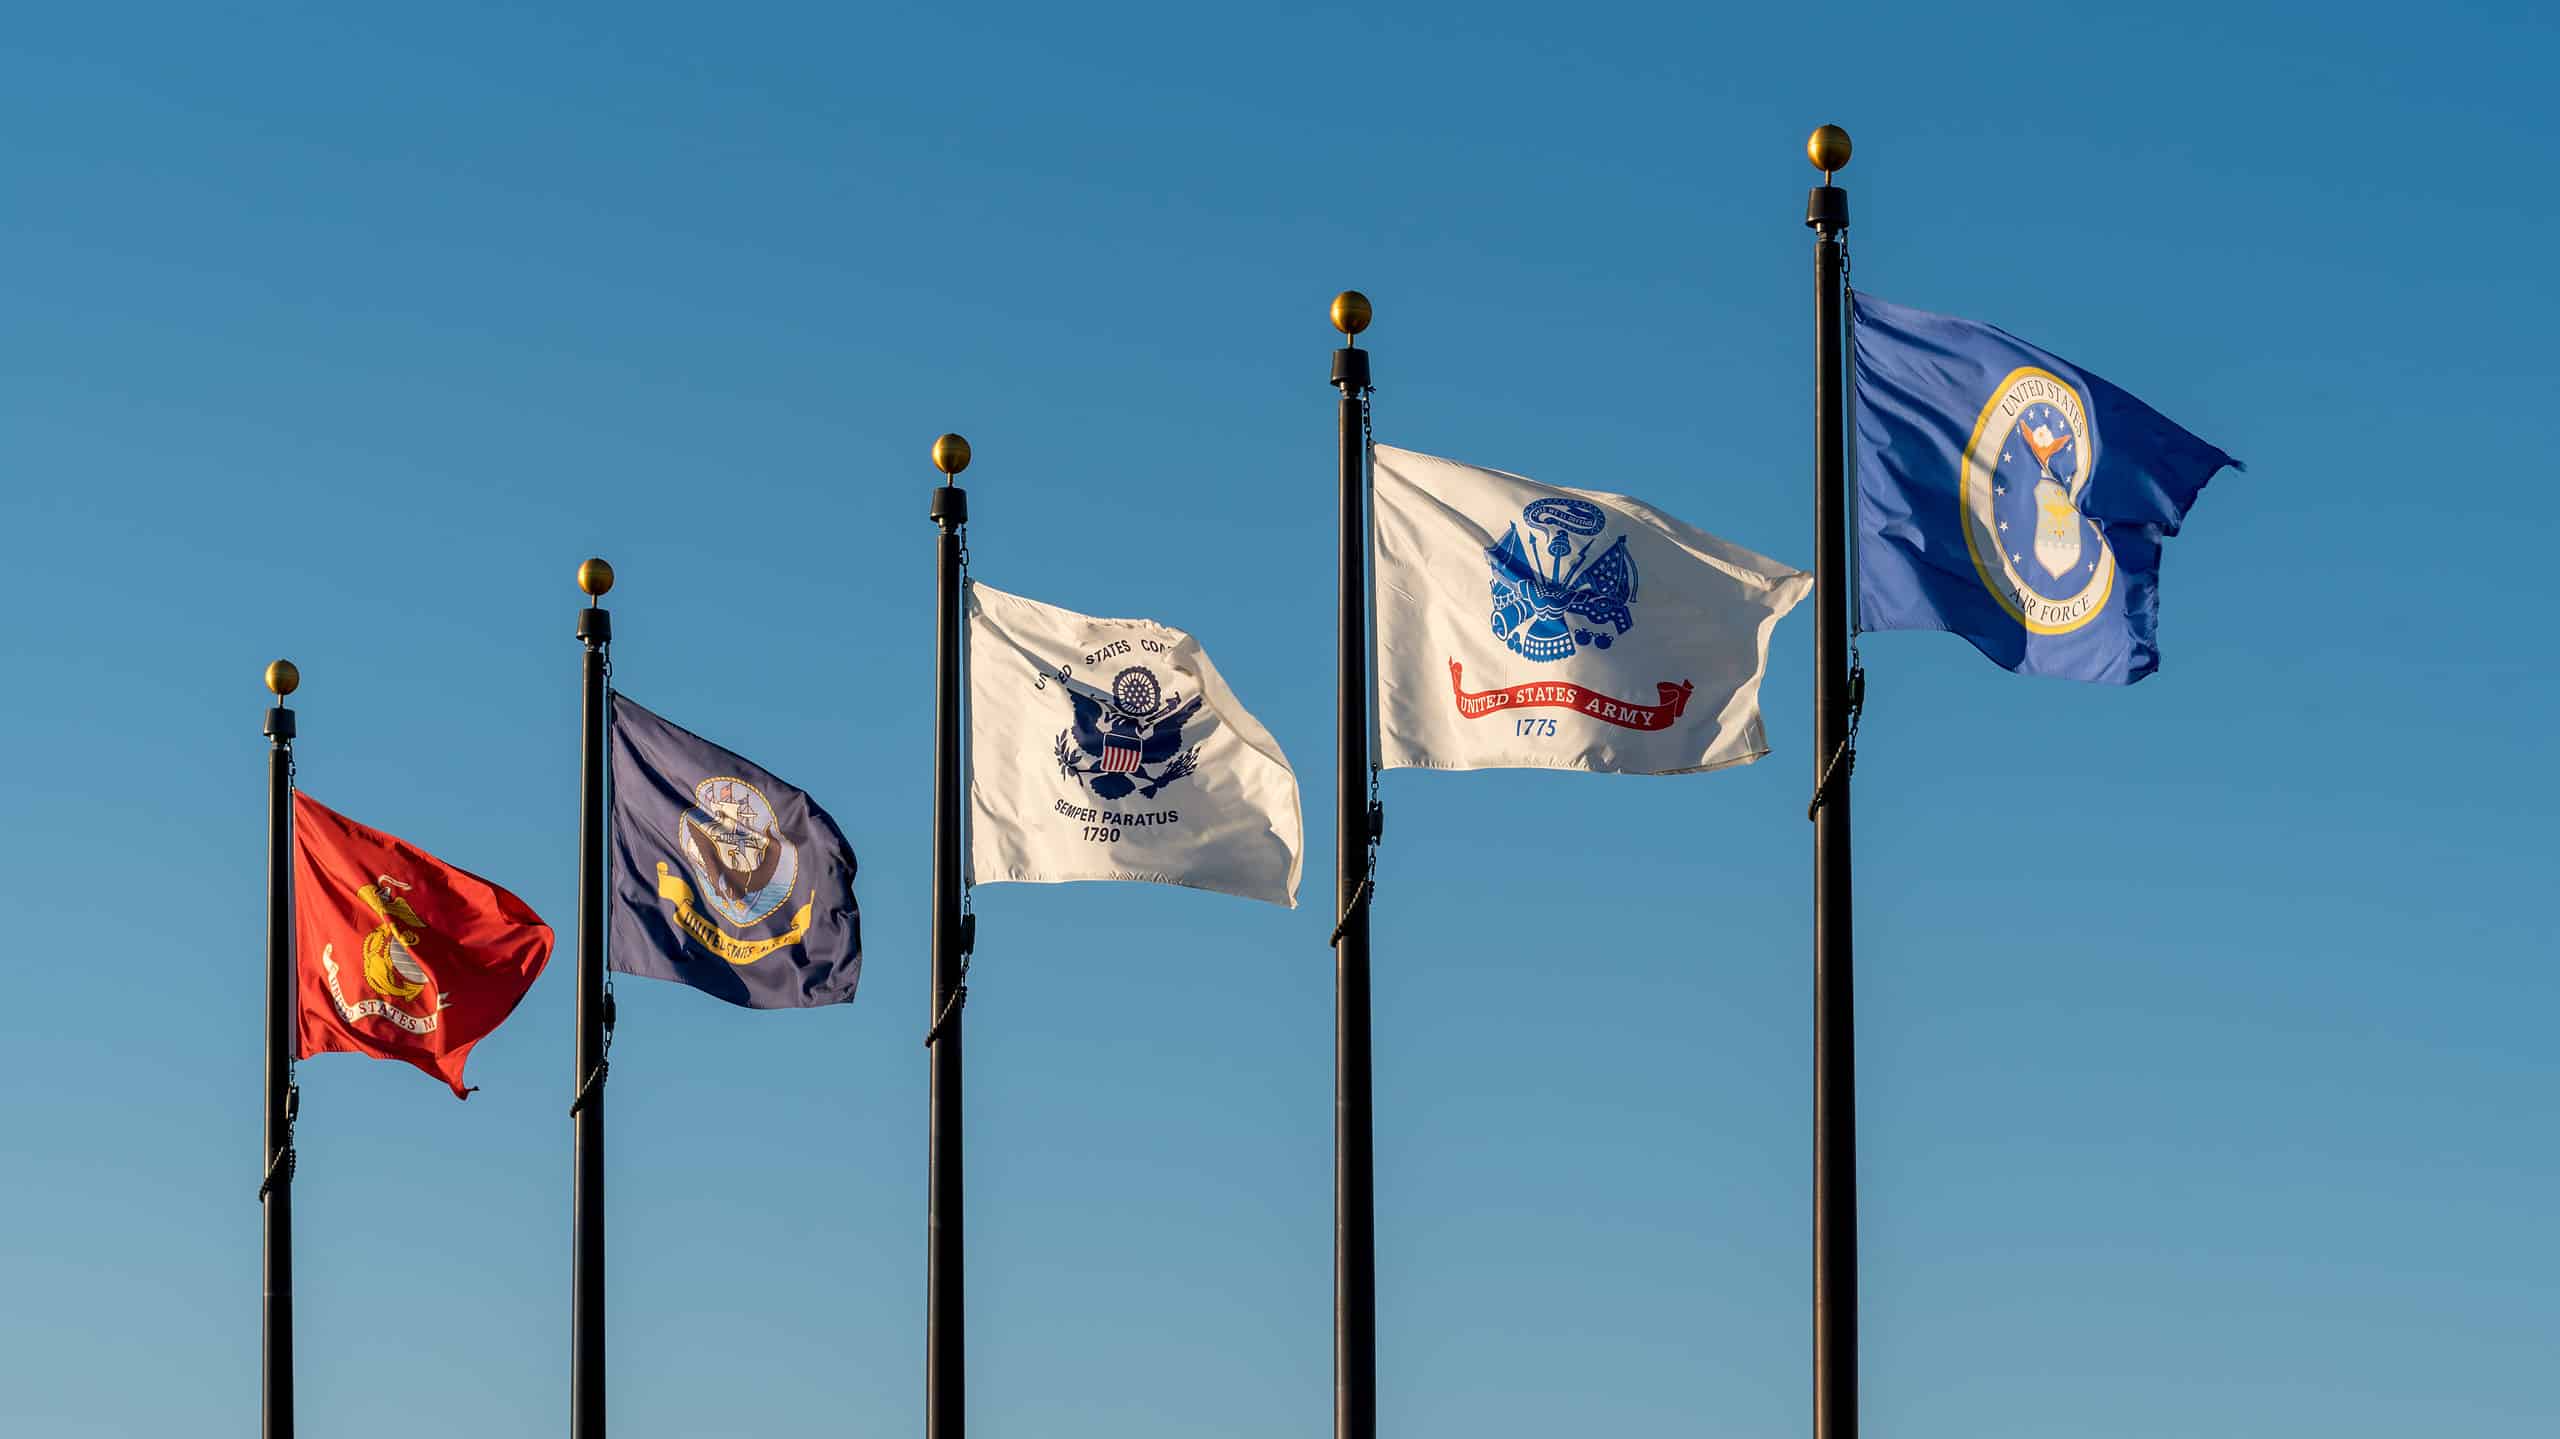 Flags of United States military branches